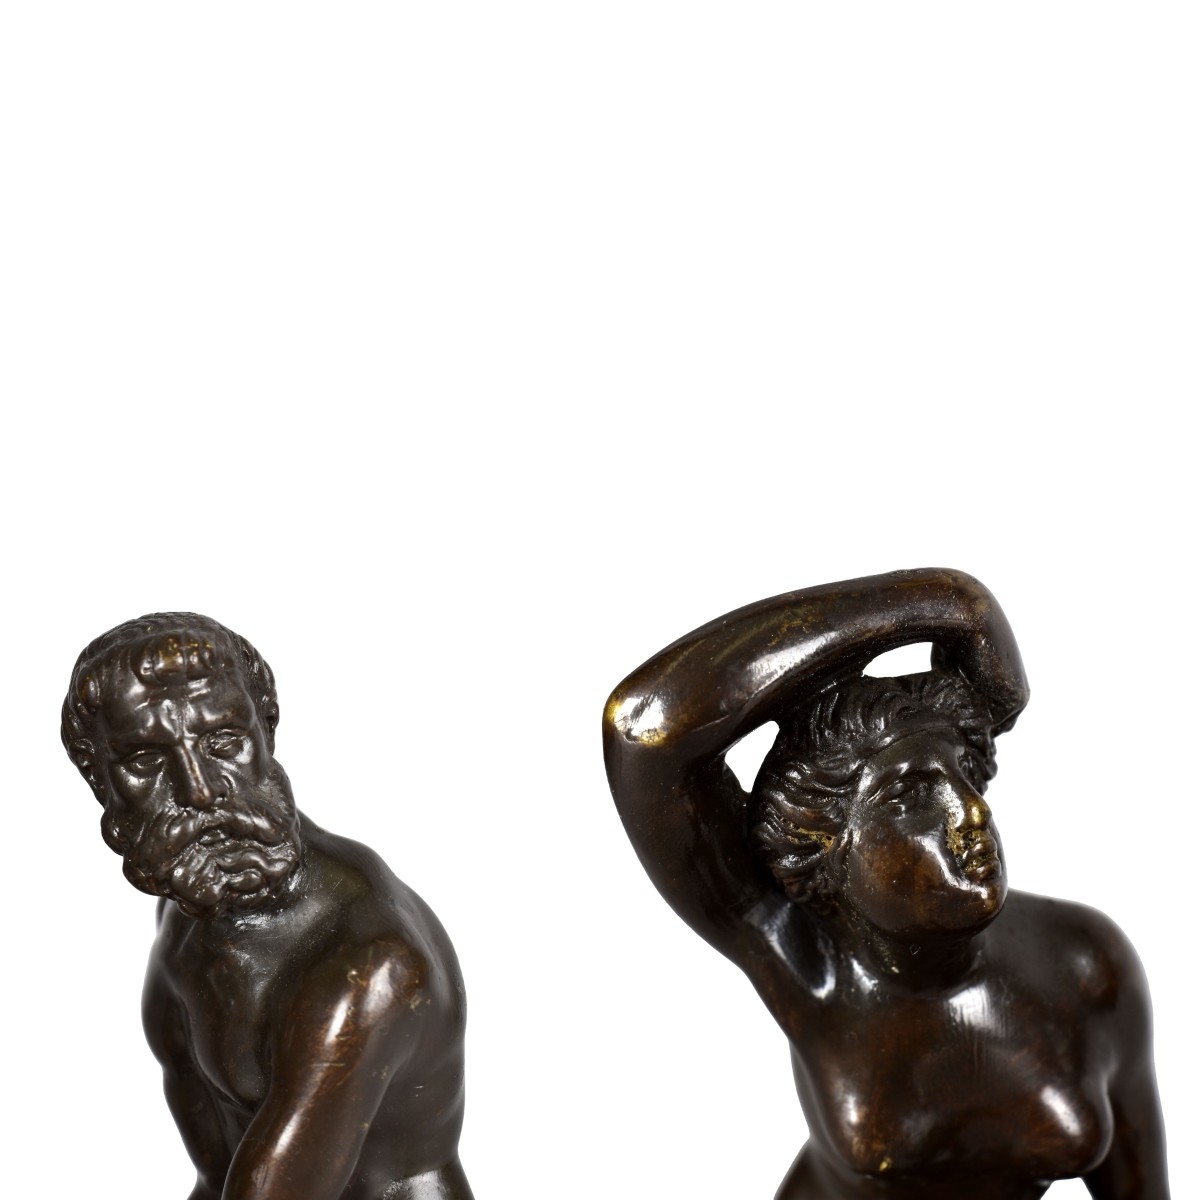 Pair of Neoclassical Style Sculptures